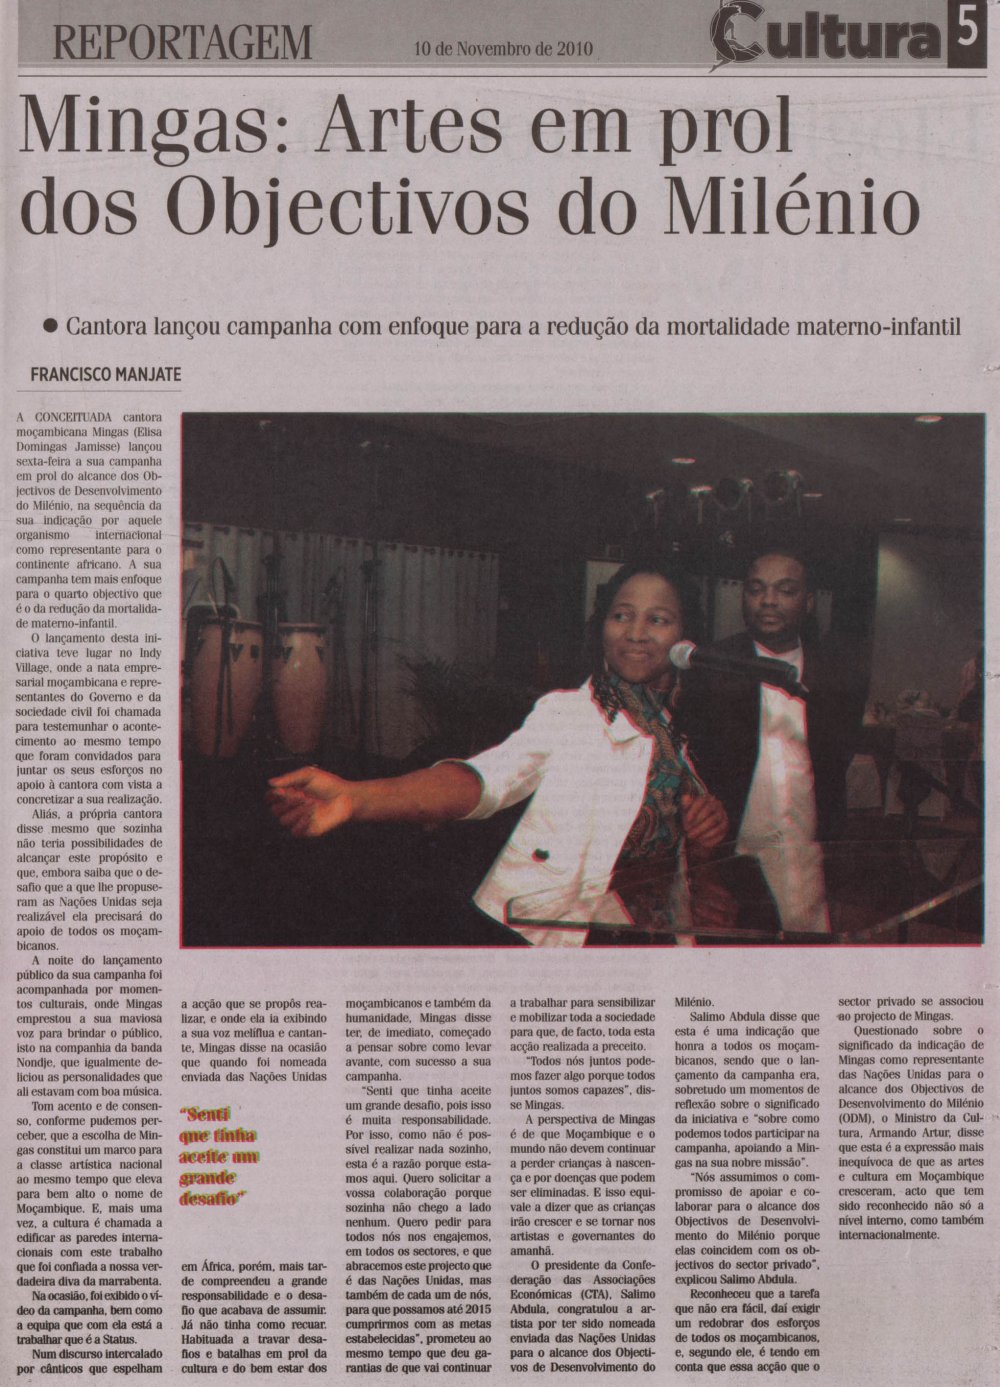 Noticias - Cultura, Nov 10, 2010 on the launching of Mingas' campaign in support of UN Millennium Development Goal #4, <br />Reduction of Infant Mortality